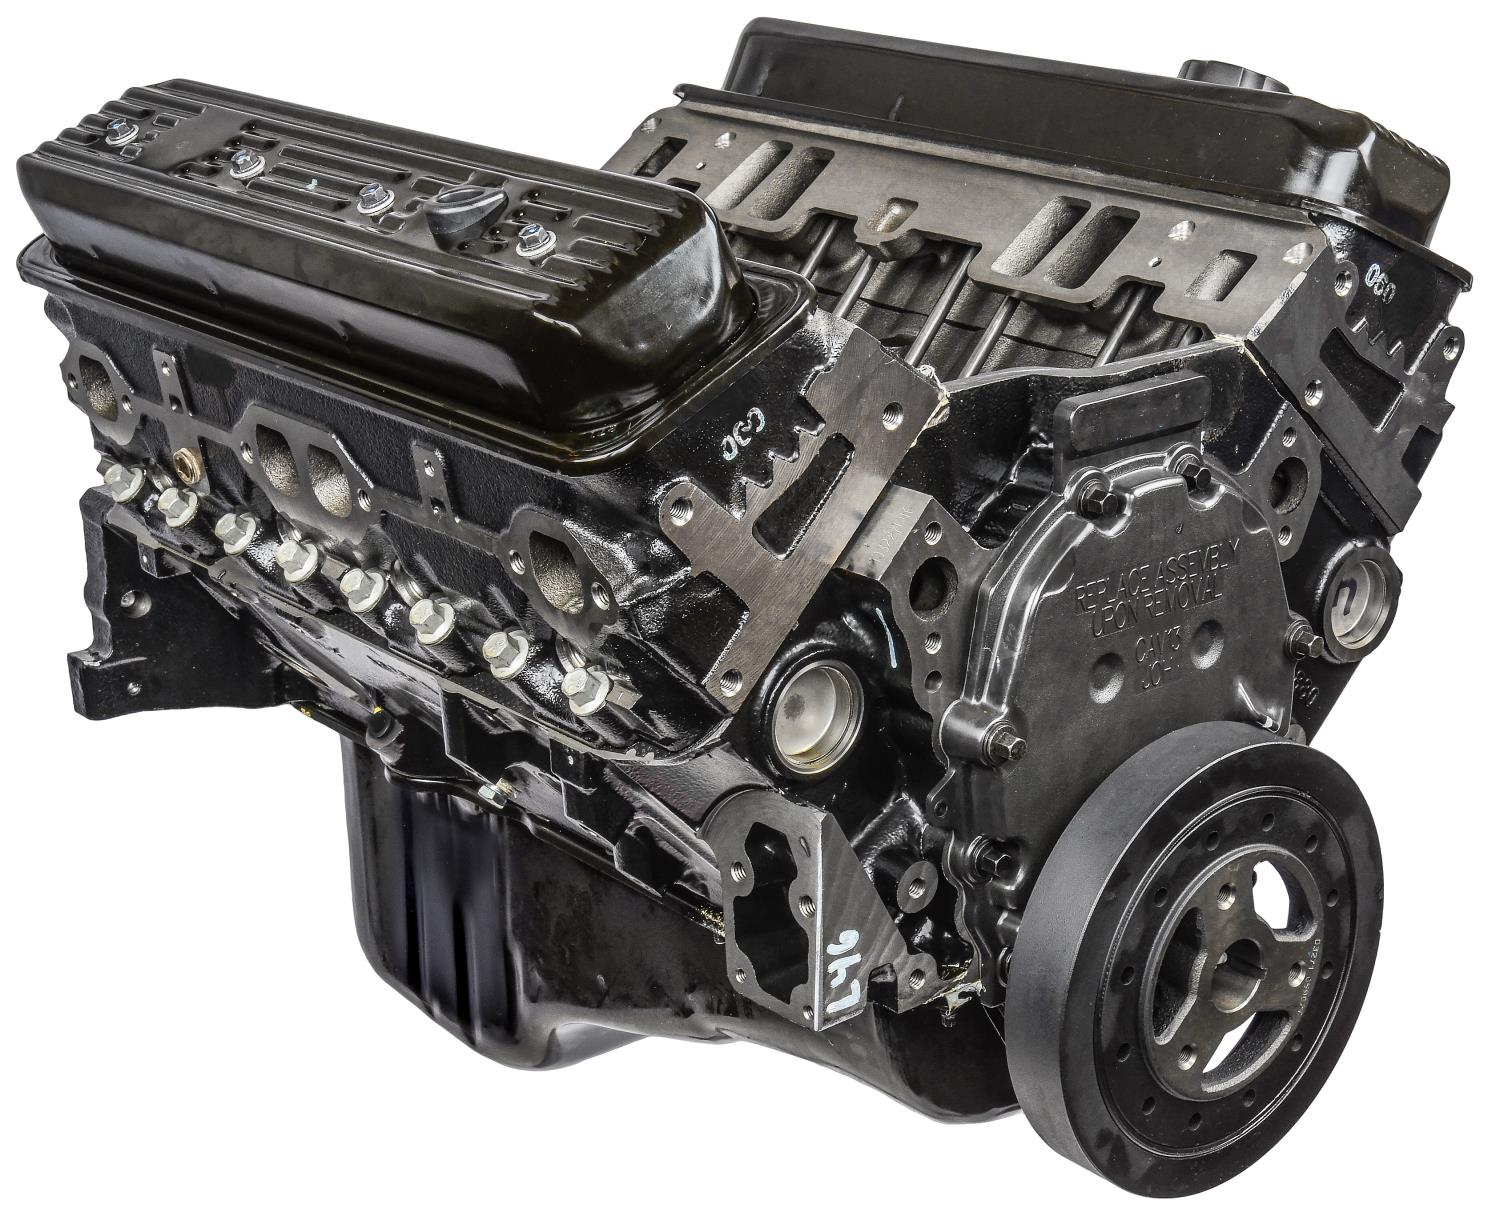 GM Replacement Small Block Chevy Crate Engine [1996-2002 L31 HD Vortec 350 ci/5.7L V8]